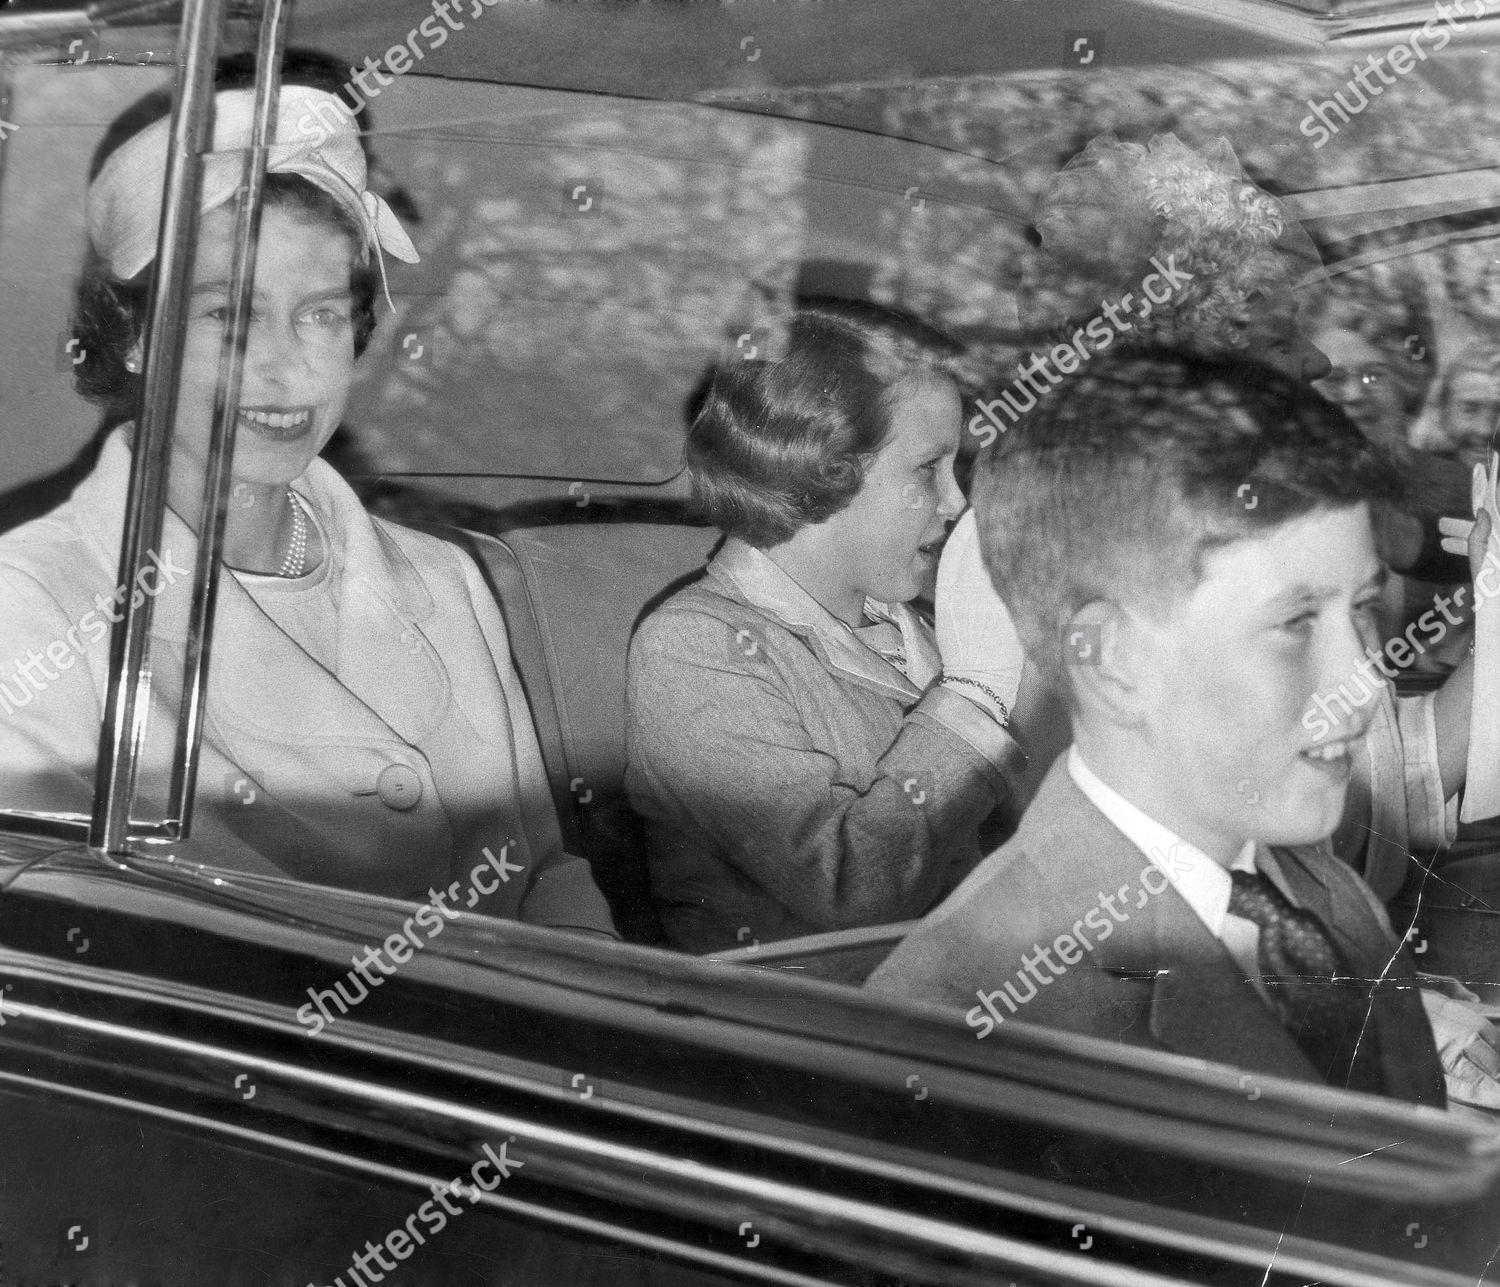 the-queen-elizabeth-ii-prince-charles-and-princess-anne-in-a-car-going-to-a-wedding-rehearsal-may1960-on-their-way-to-the-abbey-the-queen-queen-mother-prince-of-wales-and-princess-anne-crowds-surging-cheering-crowds-the-royal-cars-were-surroun-shutterstock-editorial-894729a.jpg